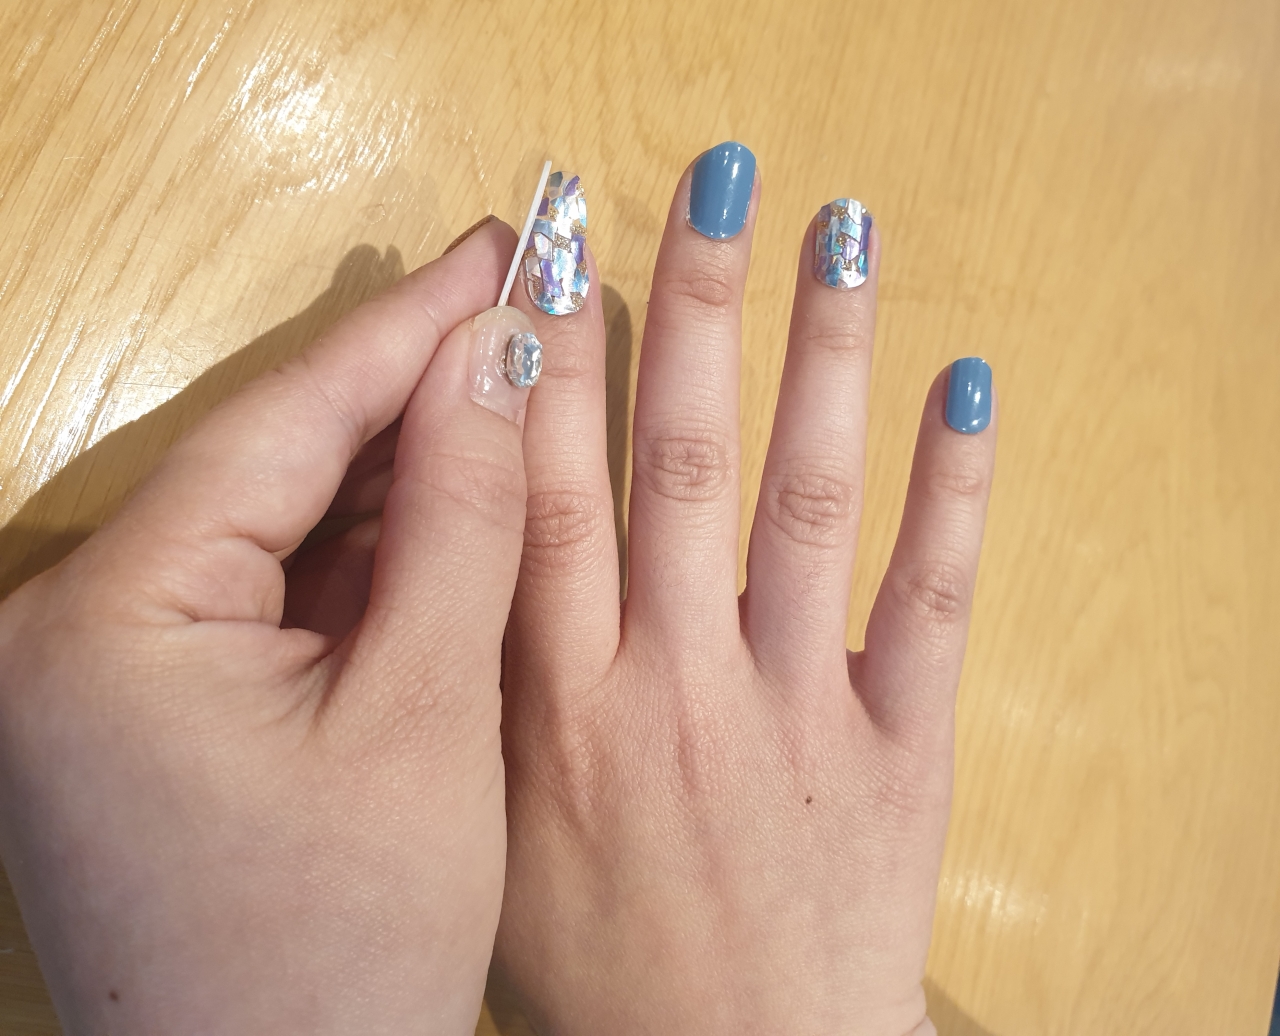 Nail art products such as gel nail stickers come in a variety of colors and designs. (Park Yuna/The Korea Herald)